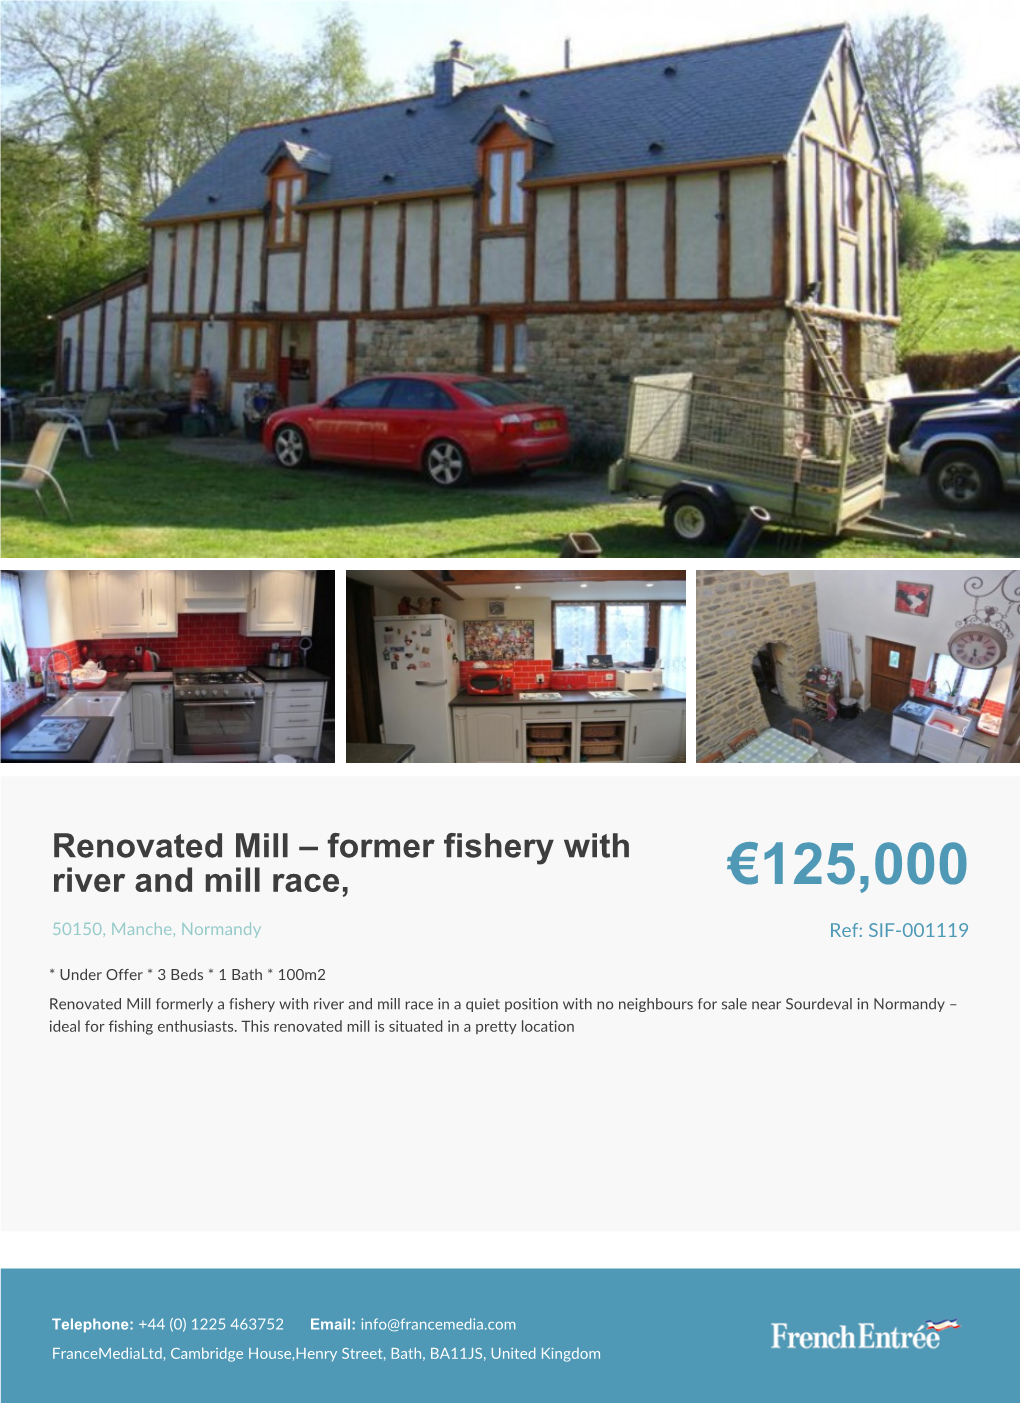 3 Bedroom Mill for Sale